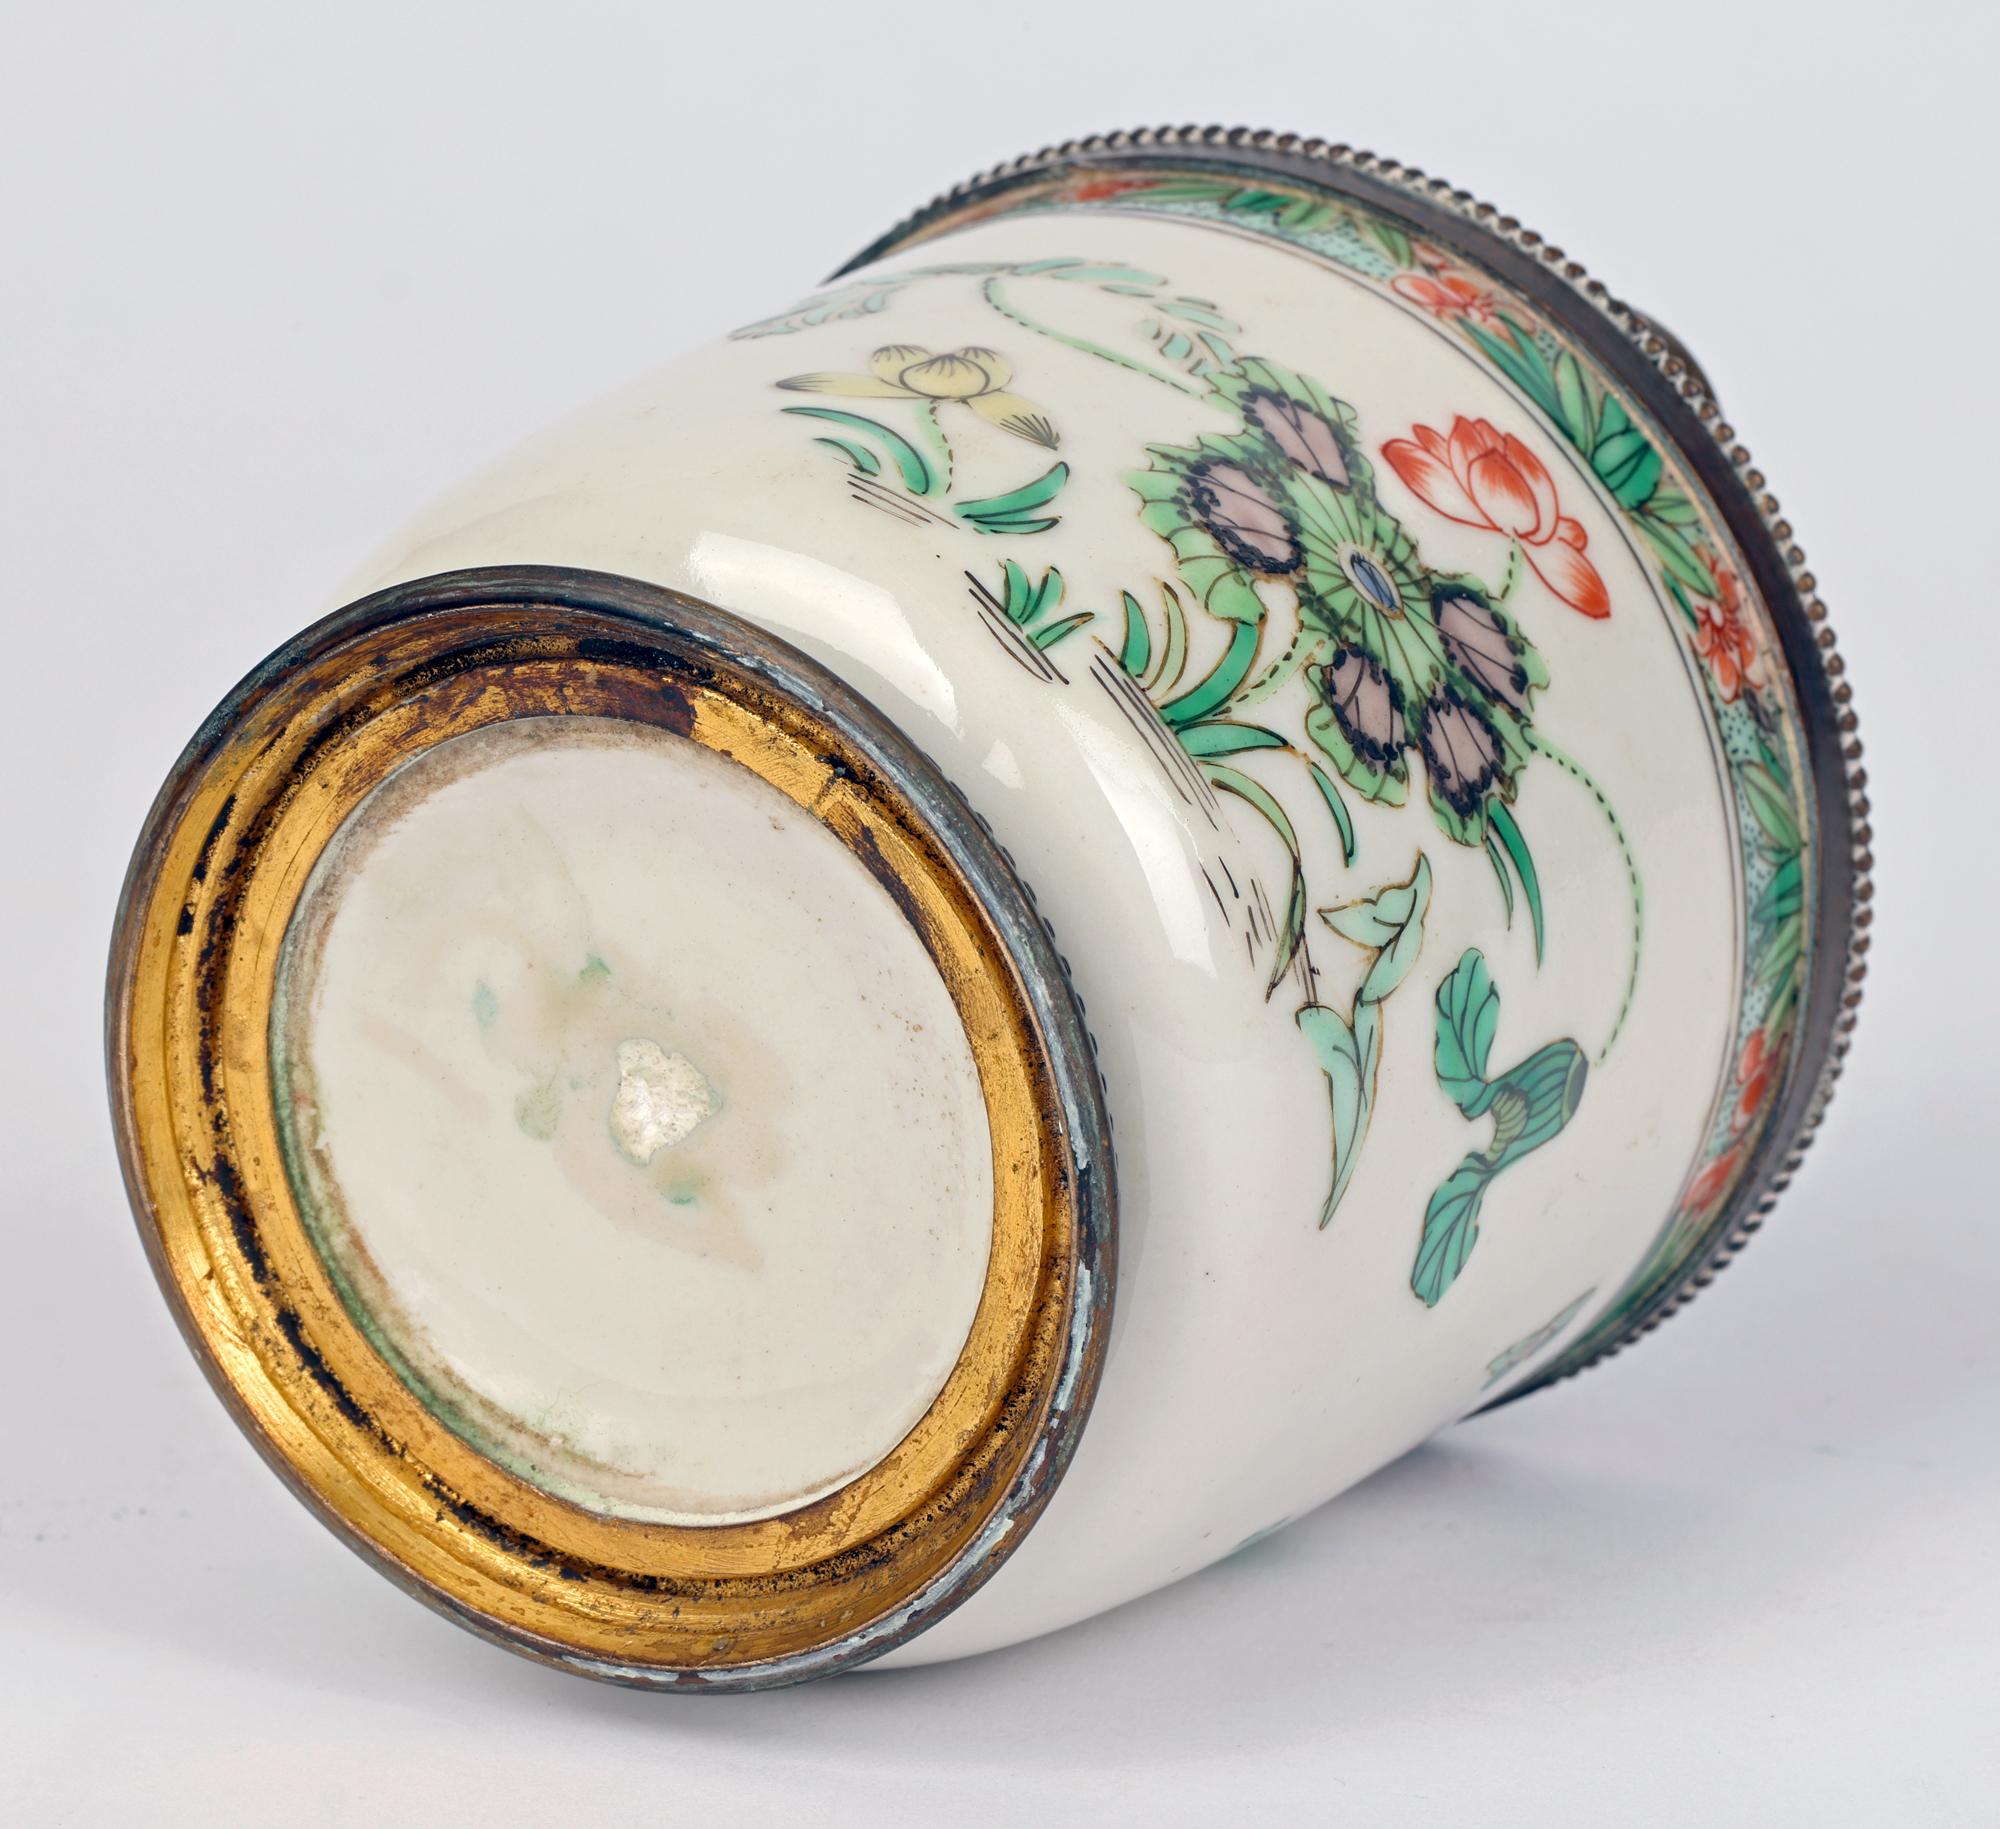 A good quality bronzed mounted French porcelain inkwell with Chinoiserie floral painted designs possibly made by Samson of Paris in the second half of the 19th century. The inkwell is of round almost cylindrical shape and stands on a bronzed foot